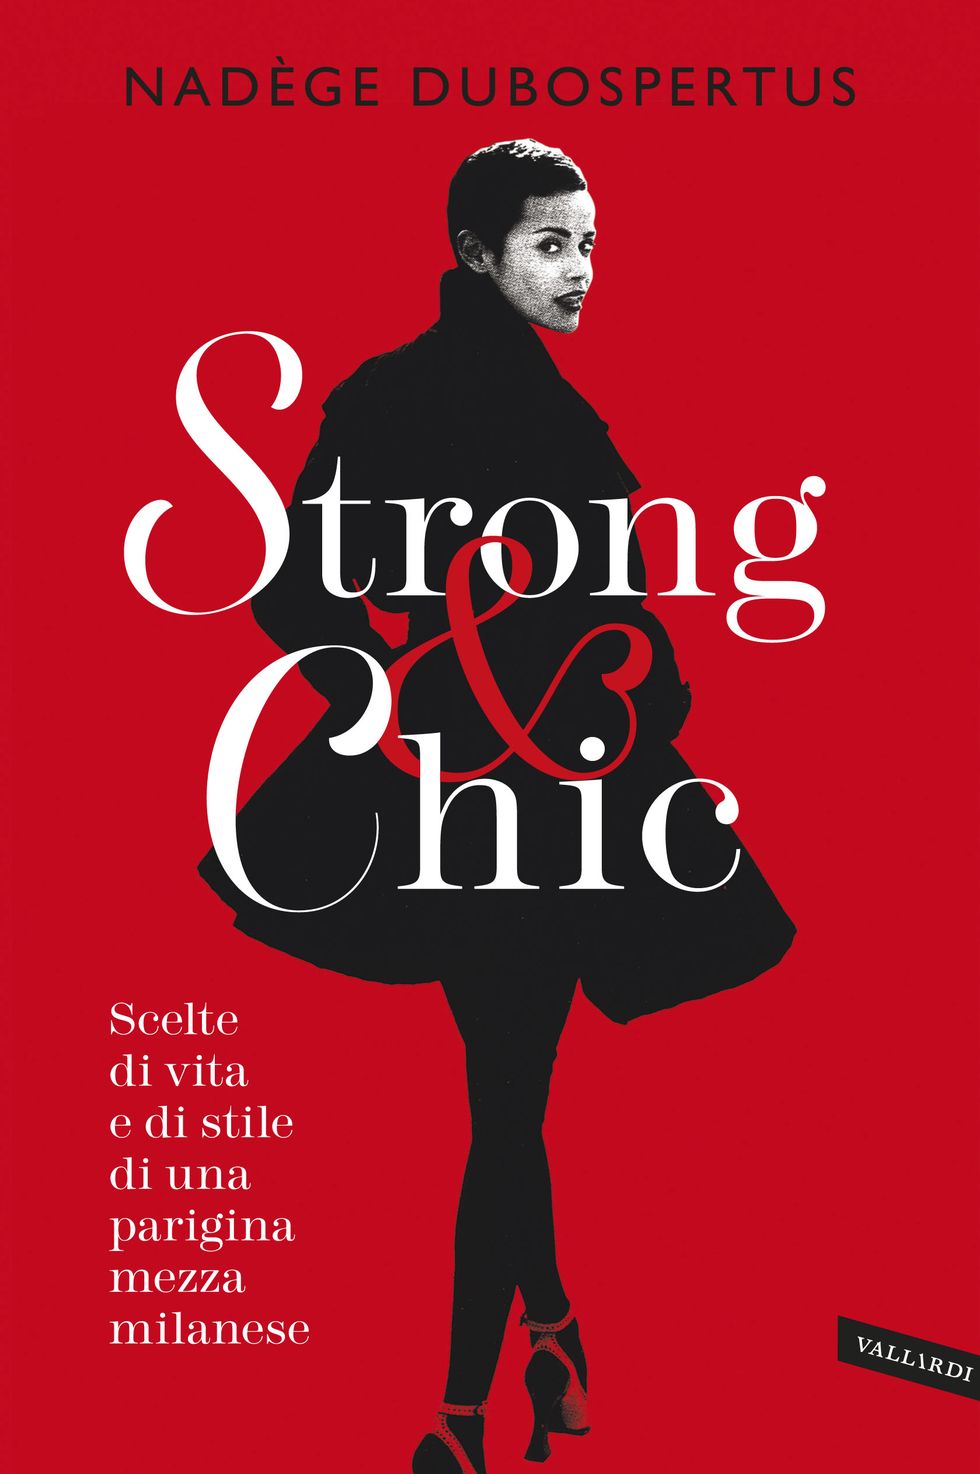 Nadege Strong and Chic